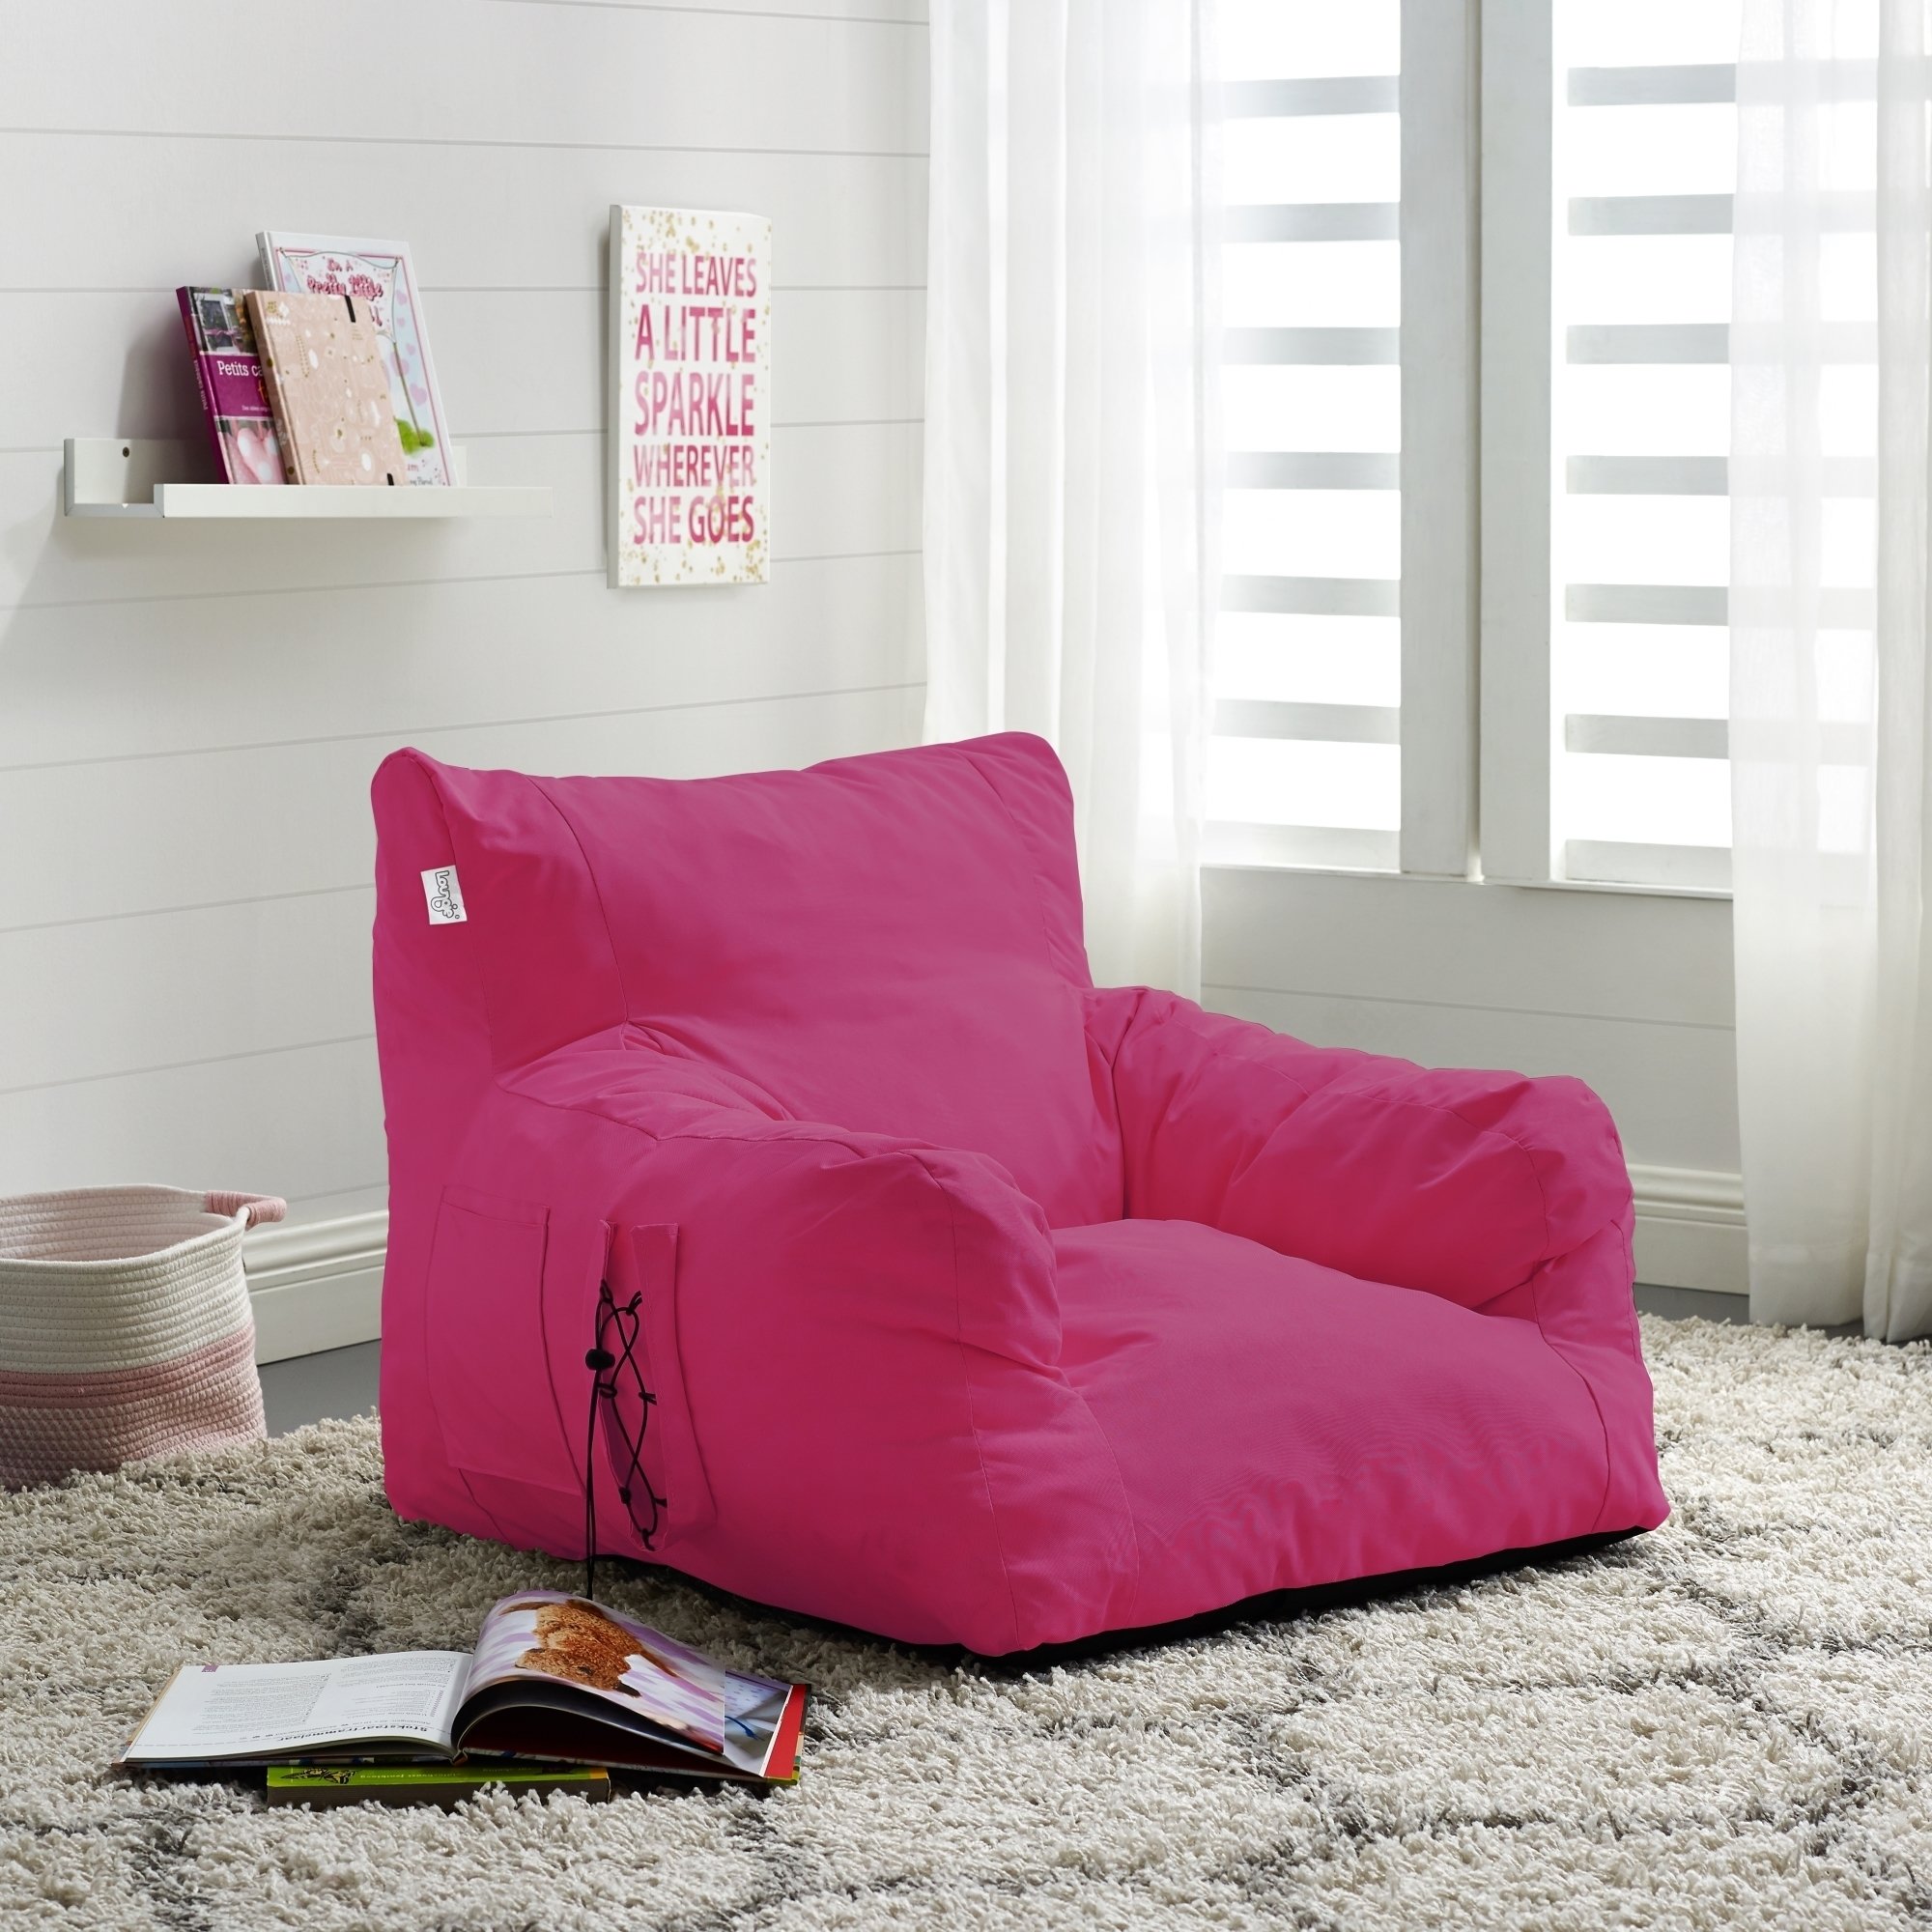 Loungie Comfy Foam Lounge Chair-Nylon Bean Bag-Indoor- Outdoor-Self Expanding-Water Resistant - Fuchsia - pink